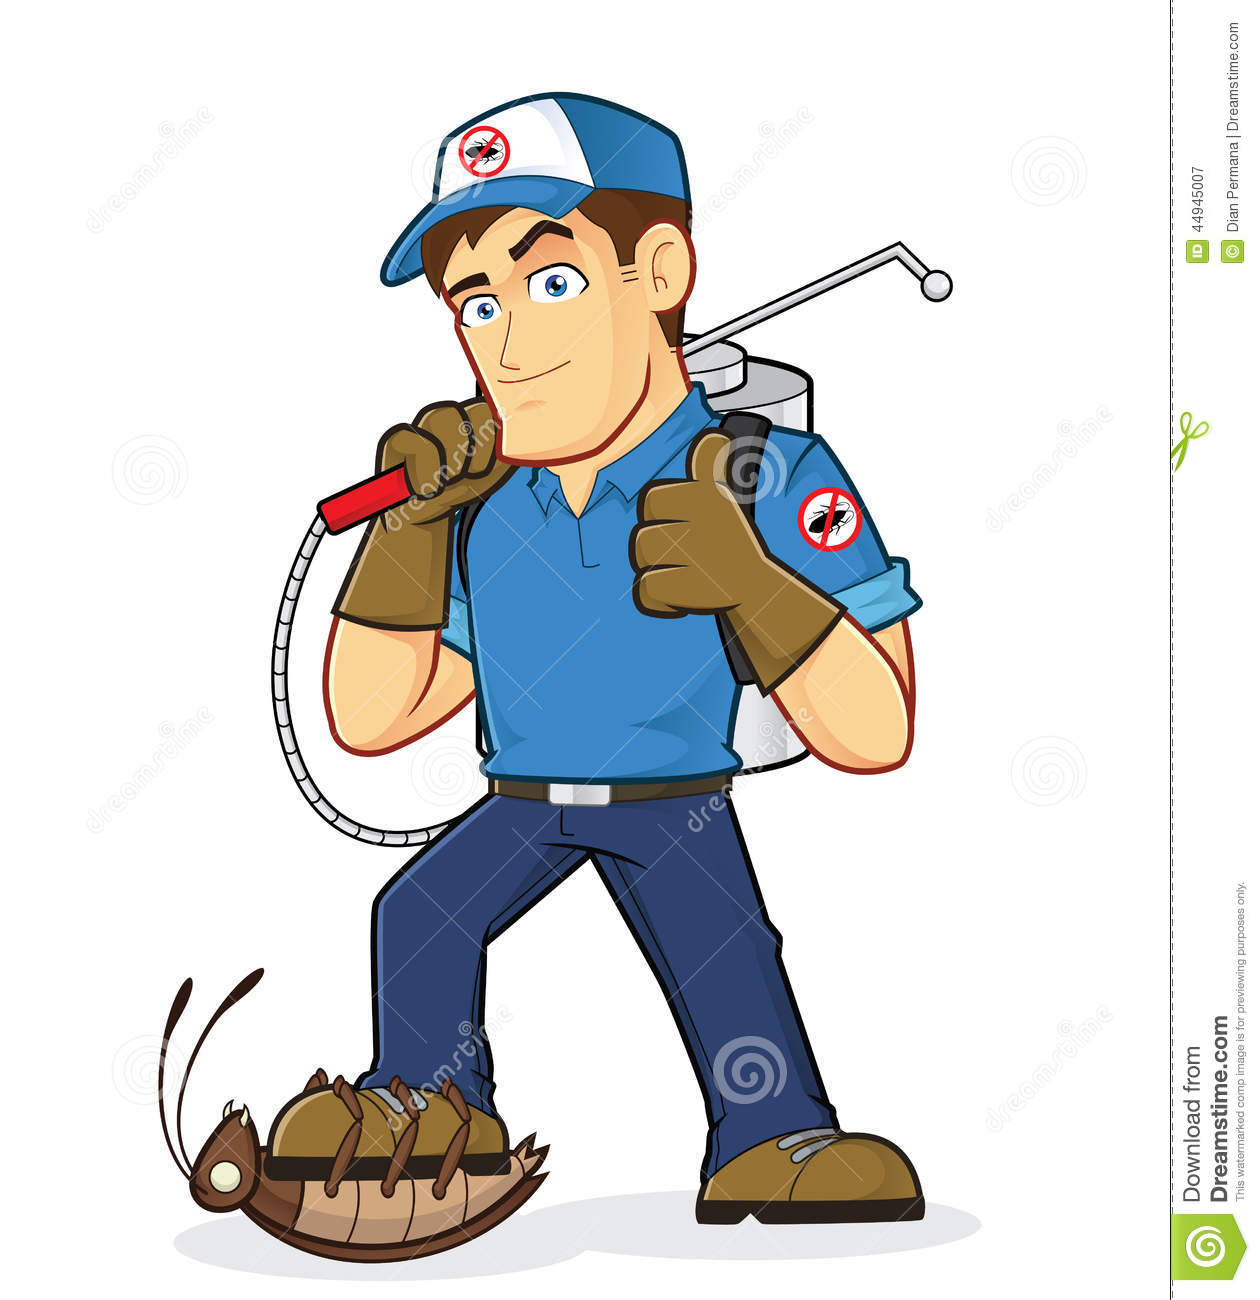 Royalty Free Stock Photography  Exterminator Or Pest Control  Image